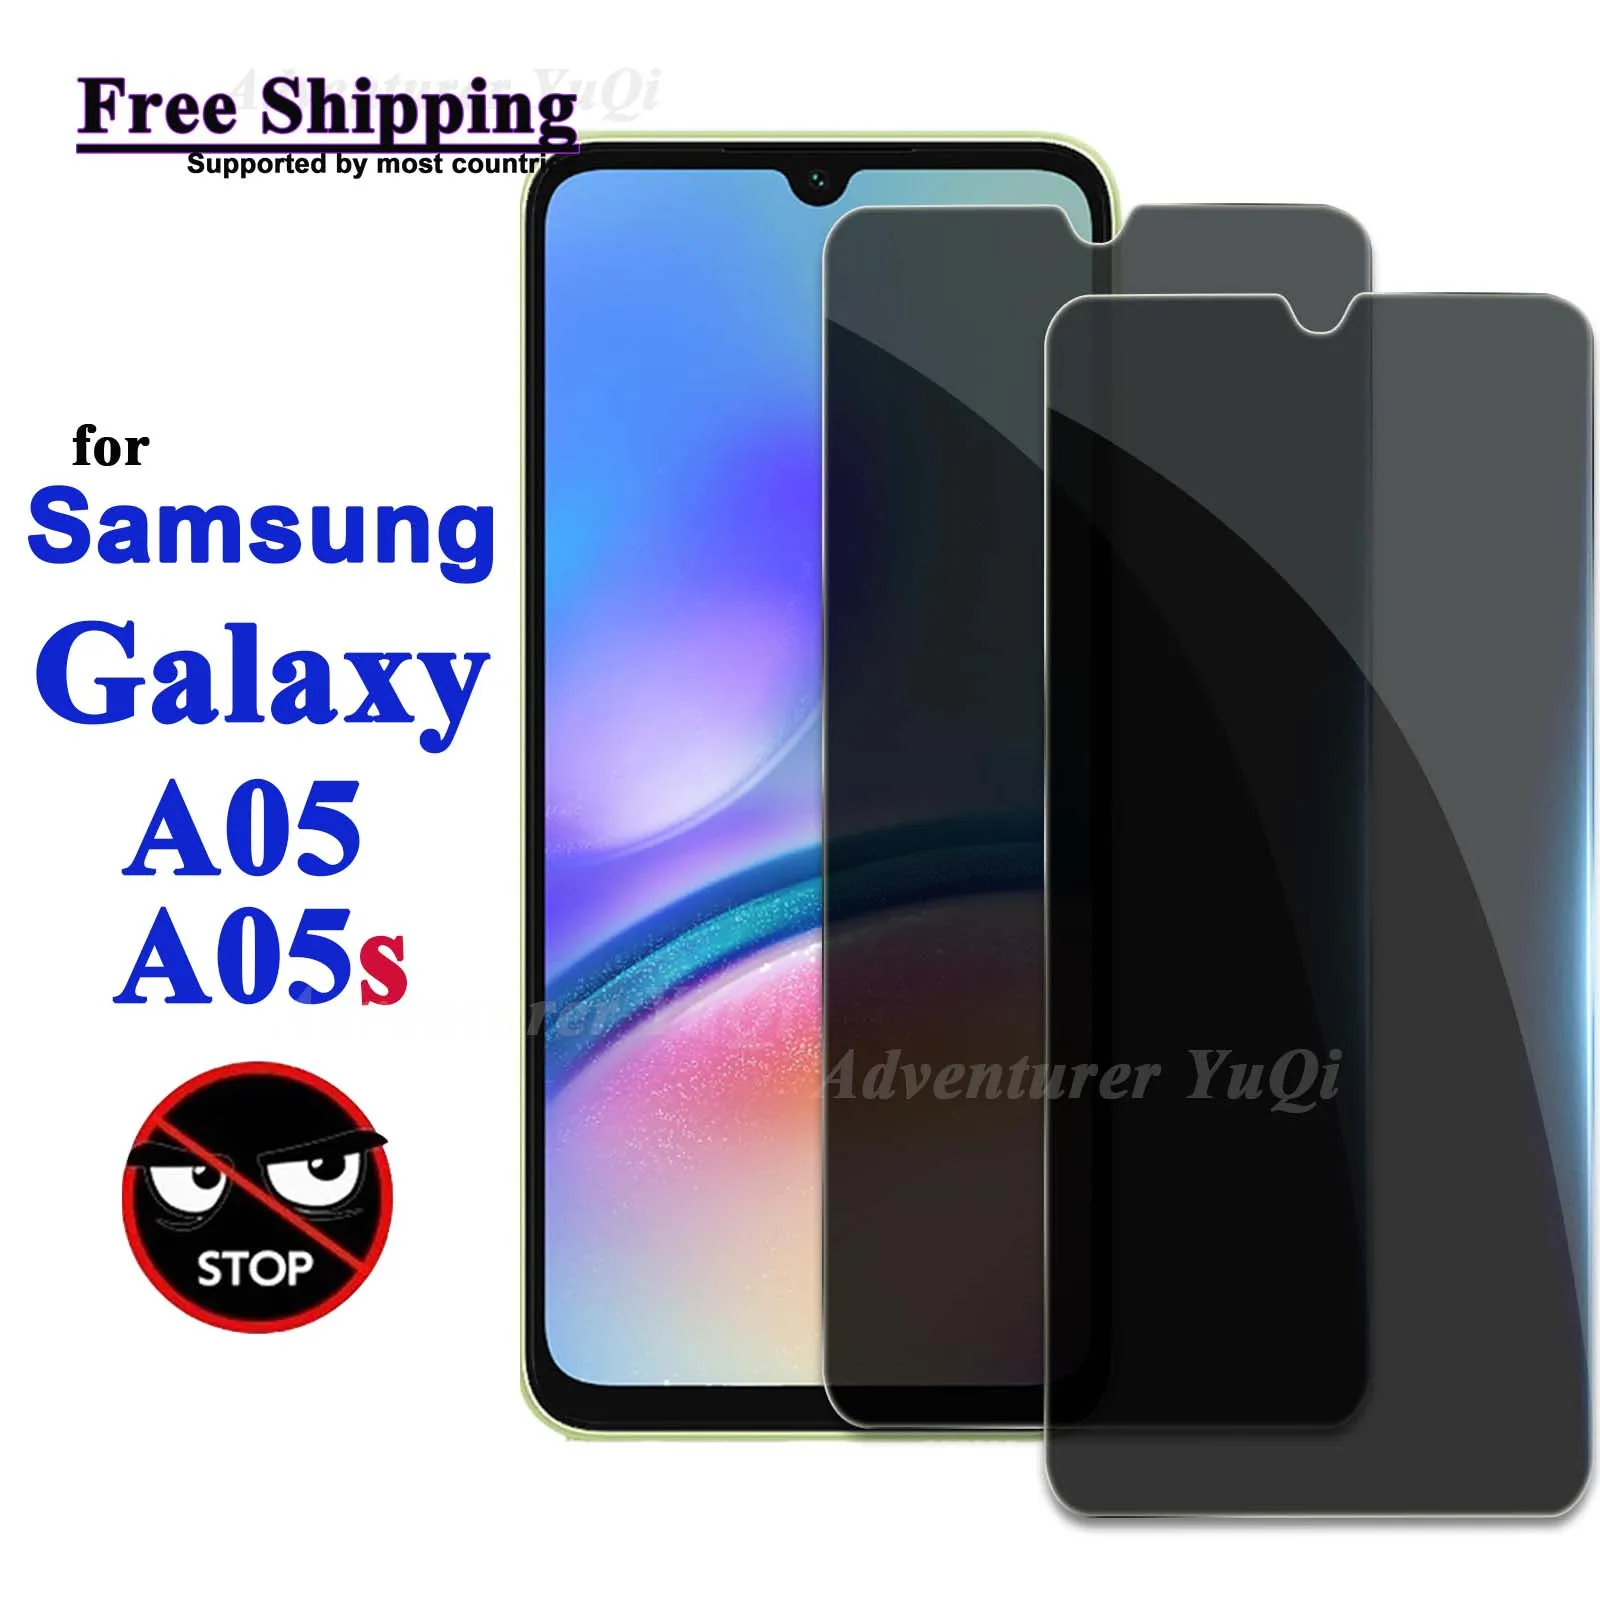 

Anti Spy Screen Protector For Galaxy A05 A05s Samsung, Tempered Glass Privacy Anti Peep Scratch 9H Case Friendly Free Shipping